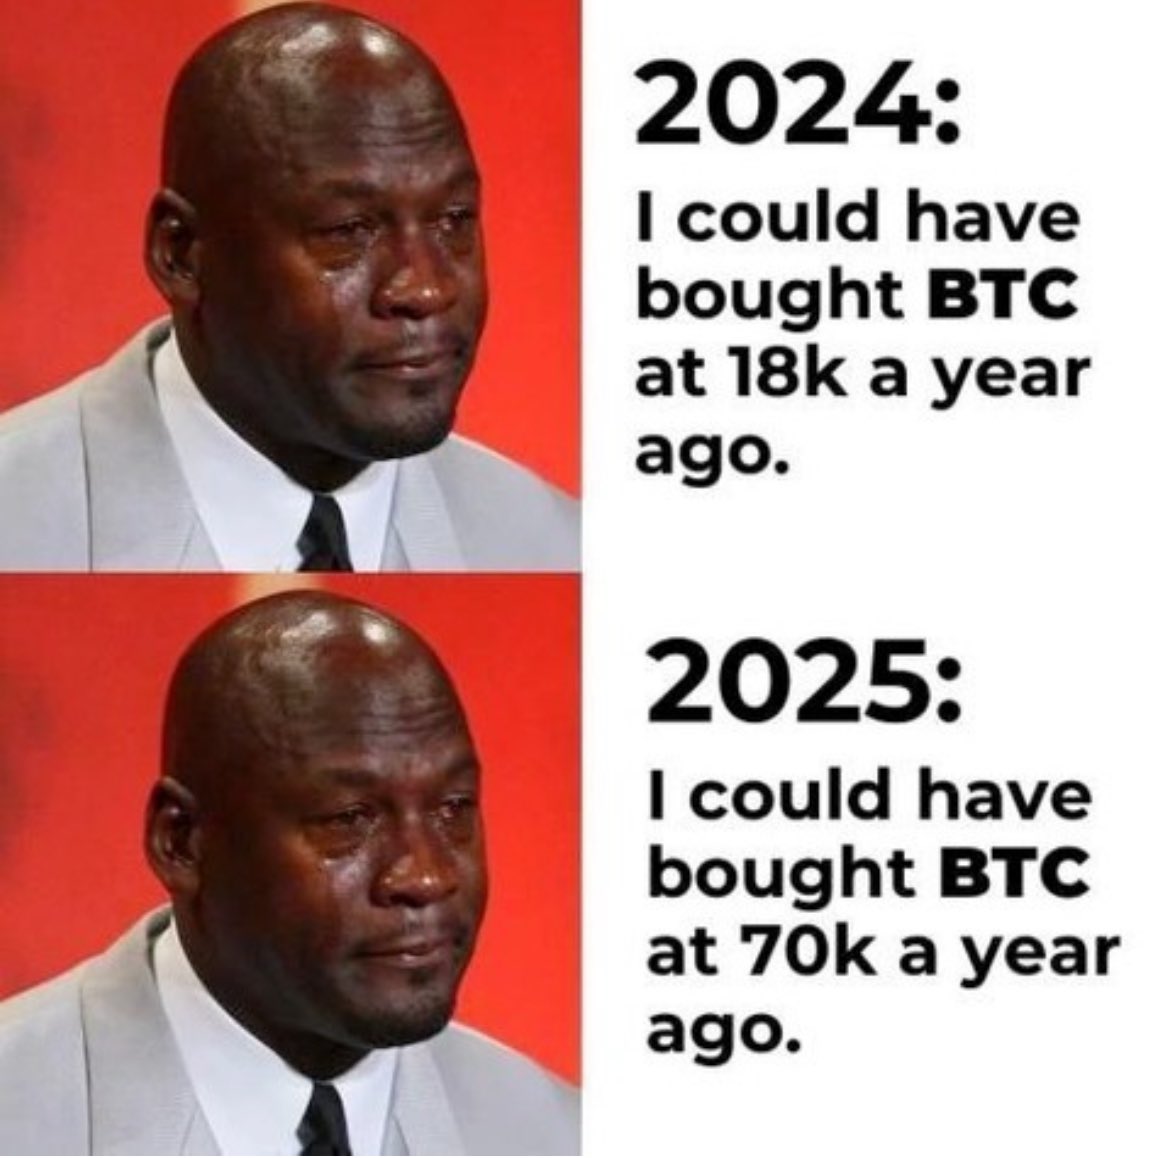 2024:
| could have
E R bought BTC
at 18k a year
2025:
| could have
| bought BTC
| at 70k a year